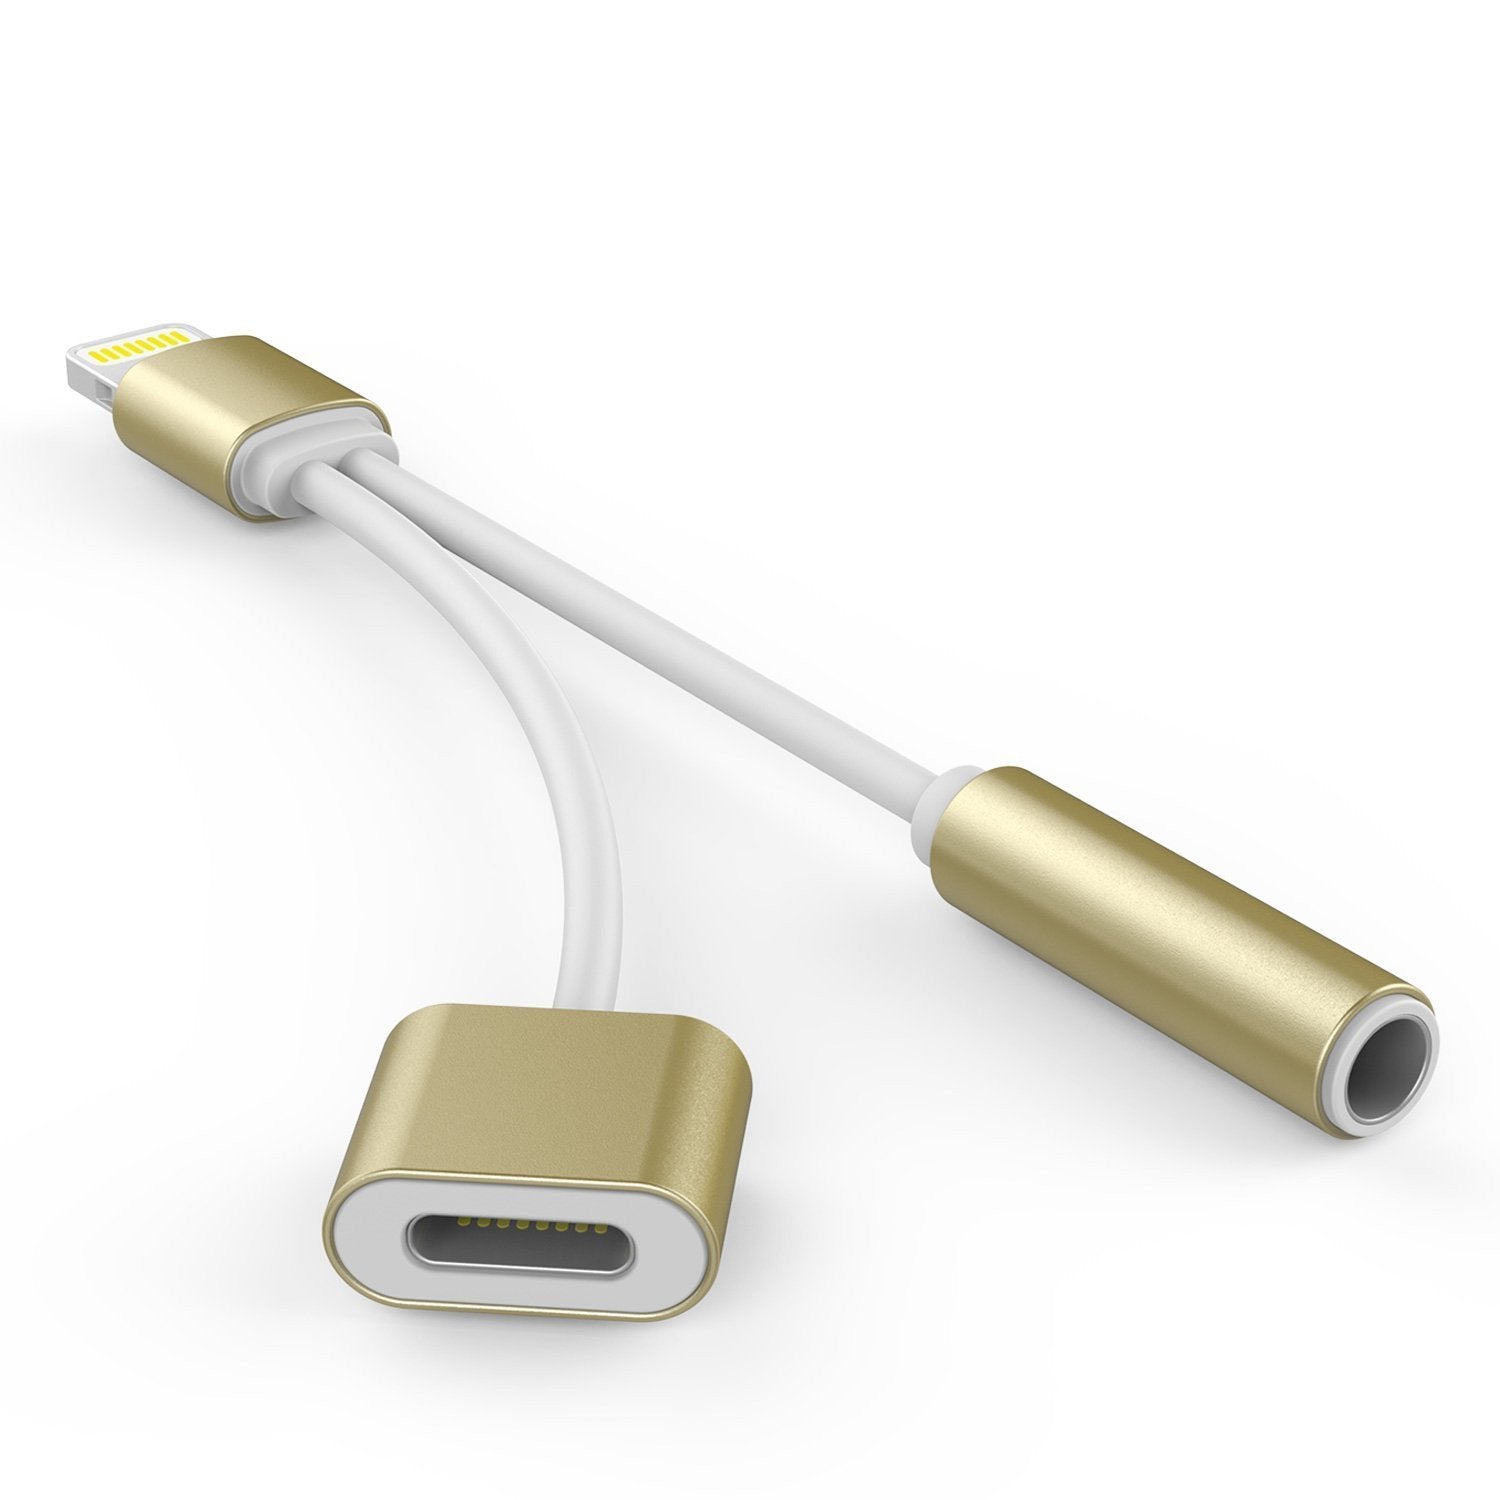 PUNKZAP Lightning Adapter Cable 2 in 1 Splitter Charger [GOLD]